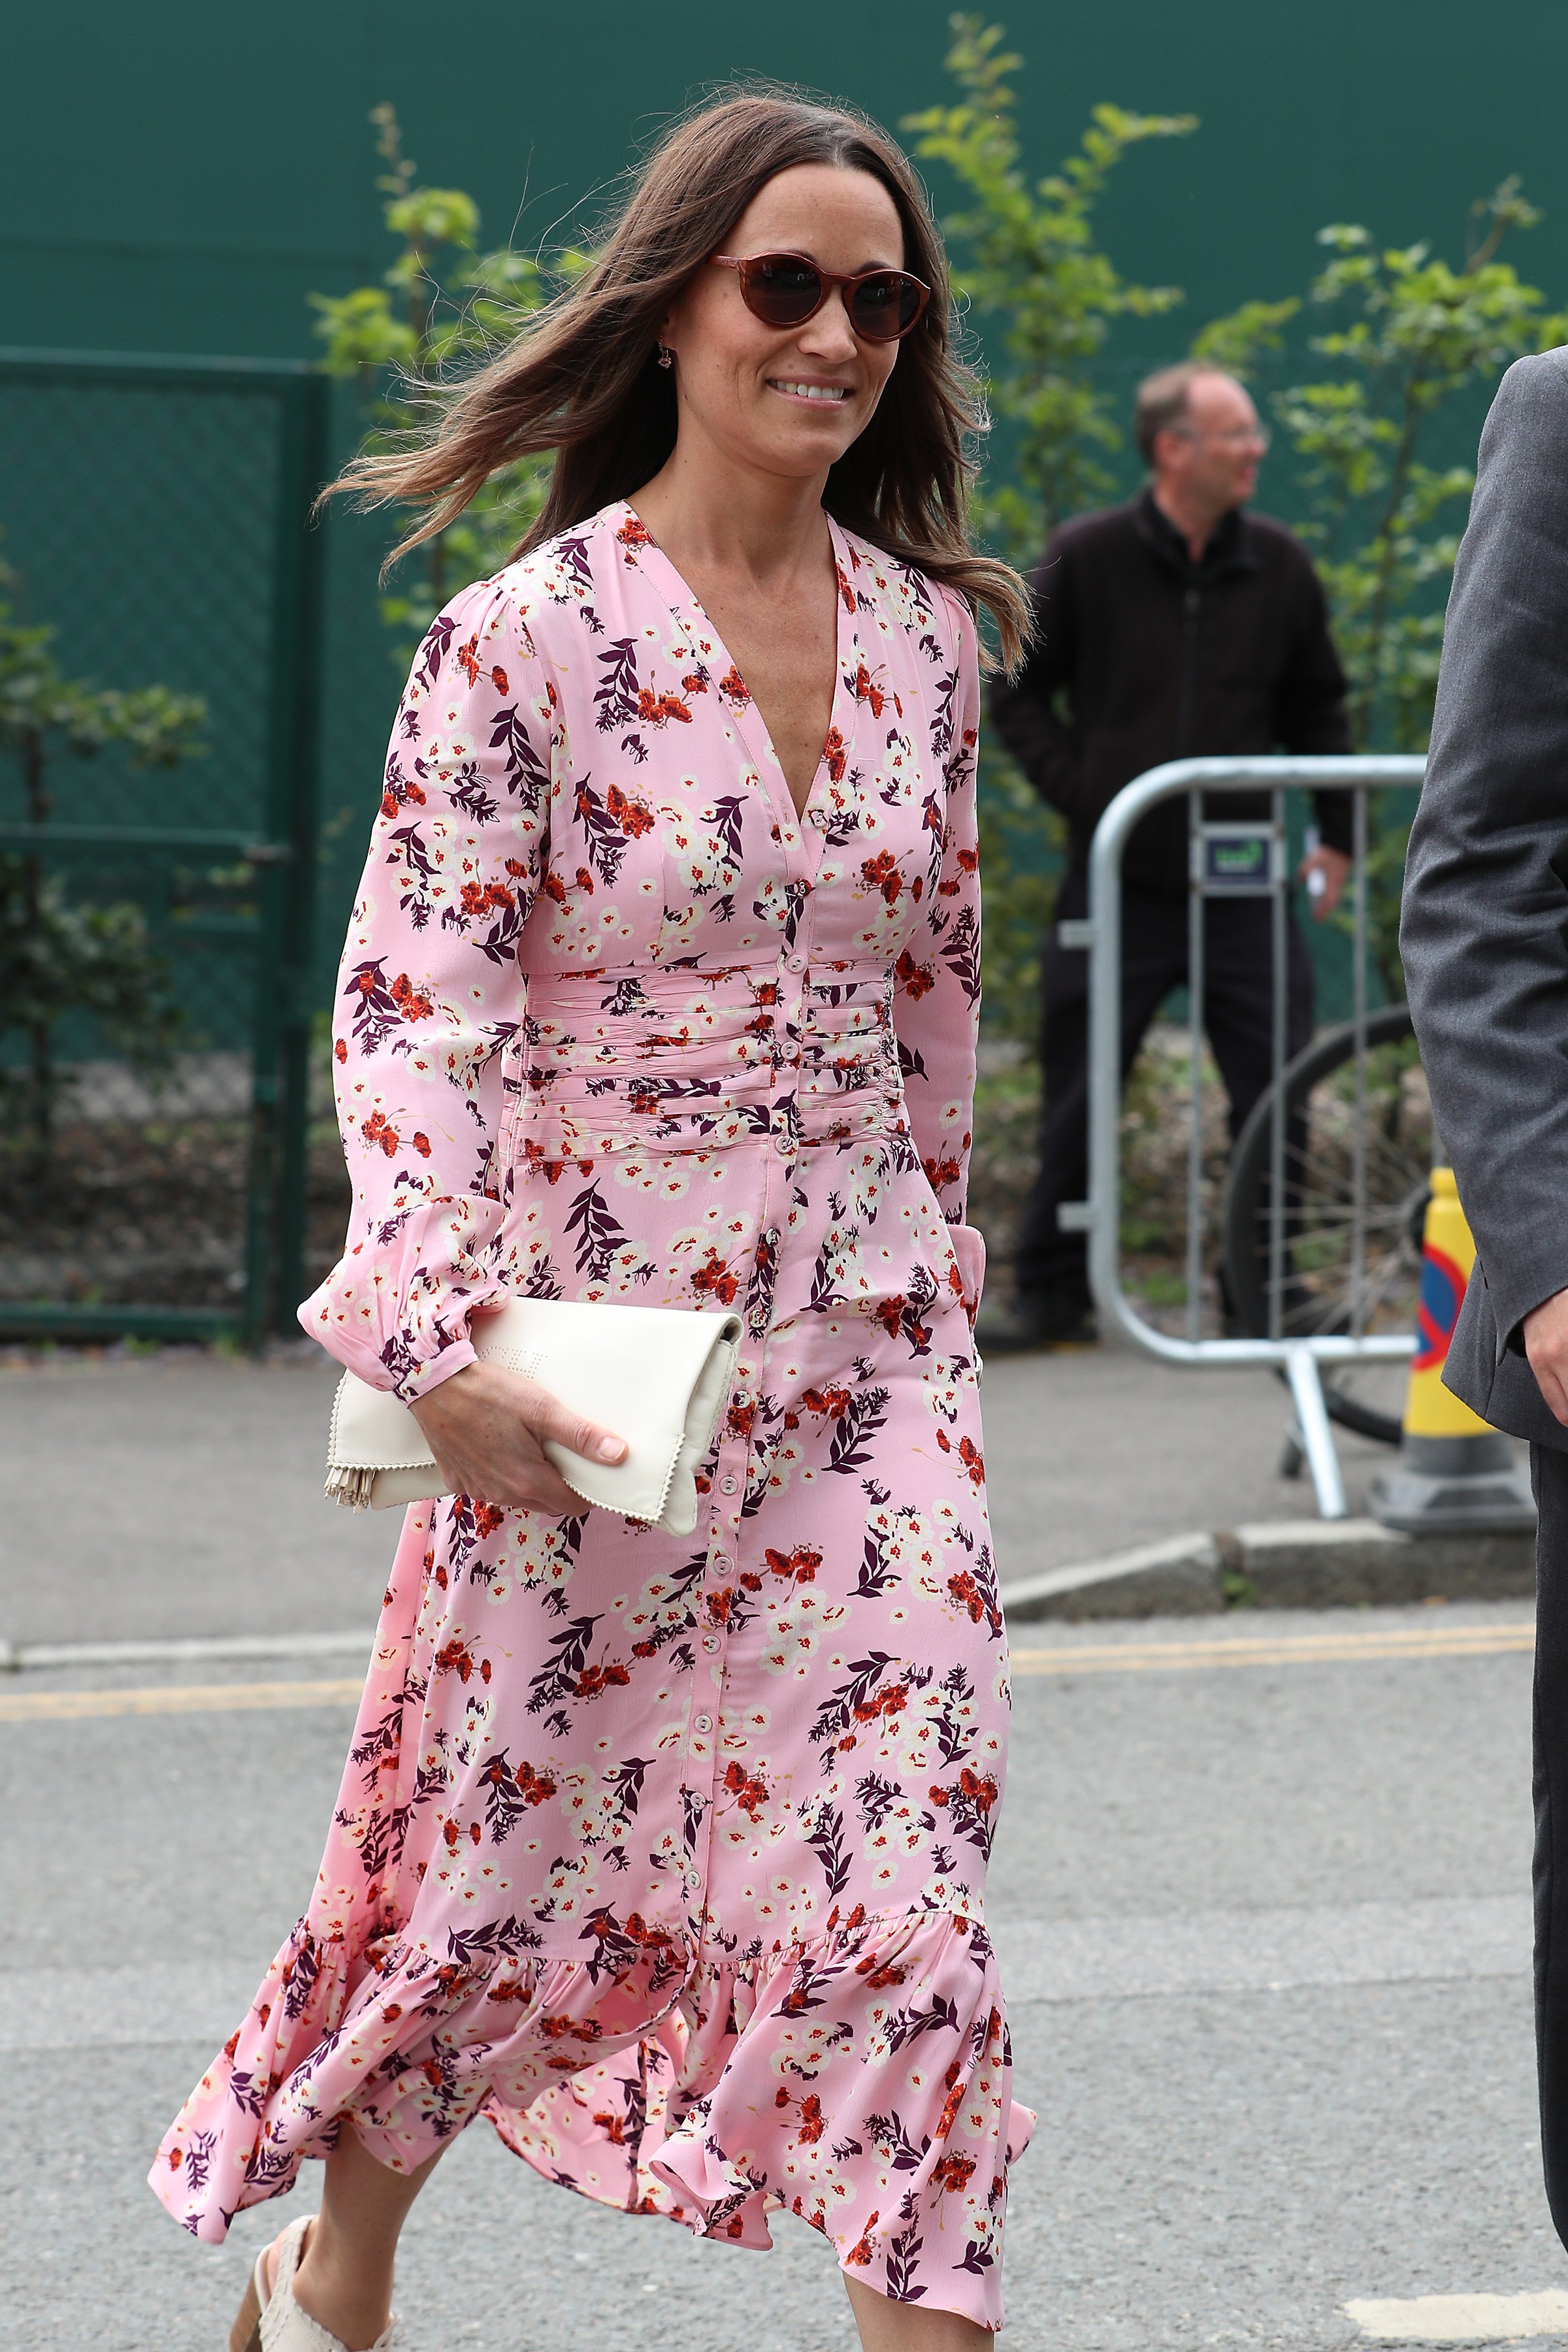 Pippa Middleton attends Men's Final Day at the Wimbledon 2019 Tennis Championships at All England Lawn Tennis and Croquet Club on July 14, 2019 in London, England. | Source: Getty Images